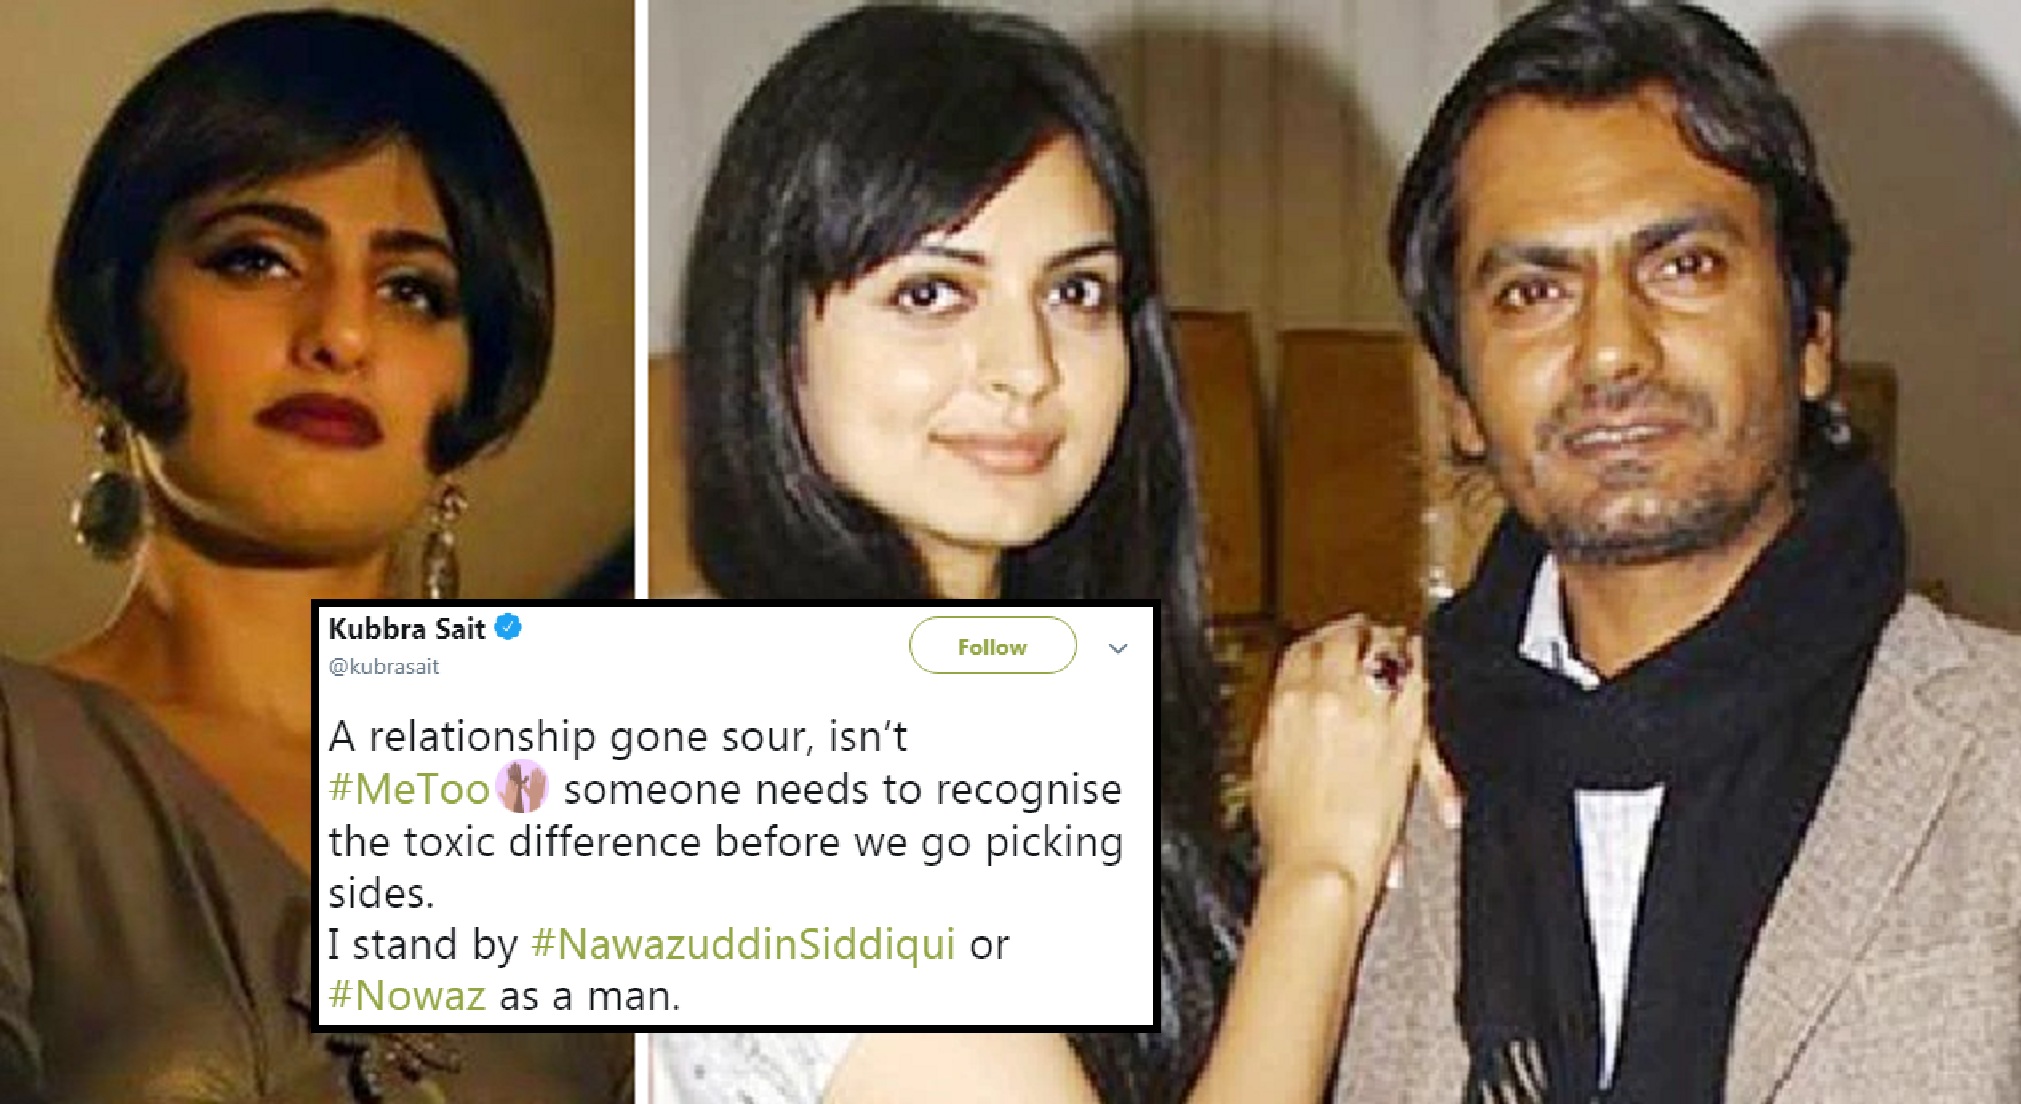 “A relationship gone sour, isn’t #MeToo” – Kubbra Sait Supports Nawazuddin Siddiqui Amidst His Ex’s Allegations Against Him